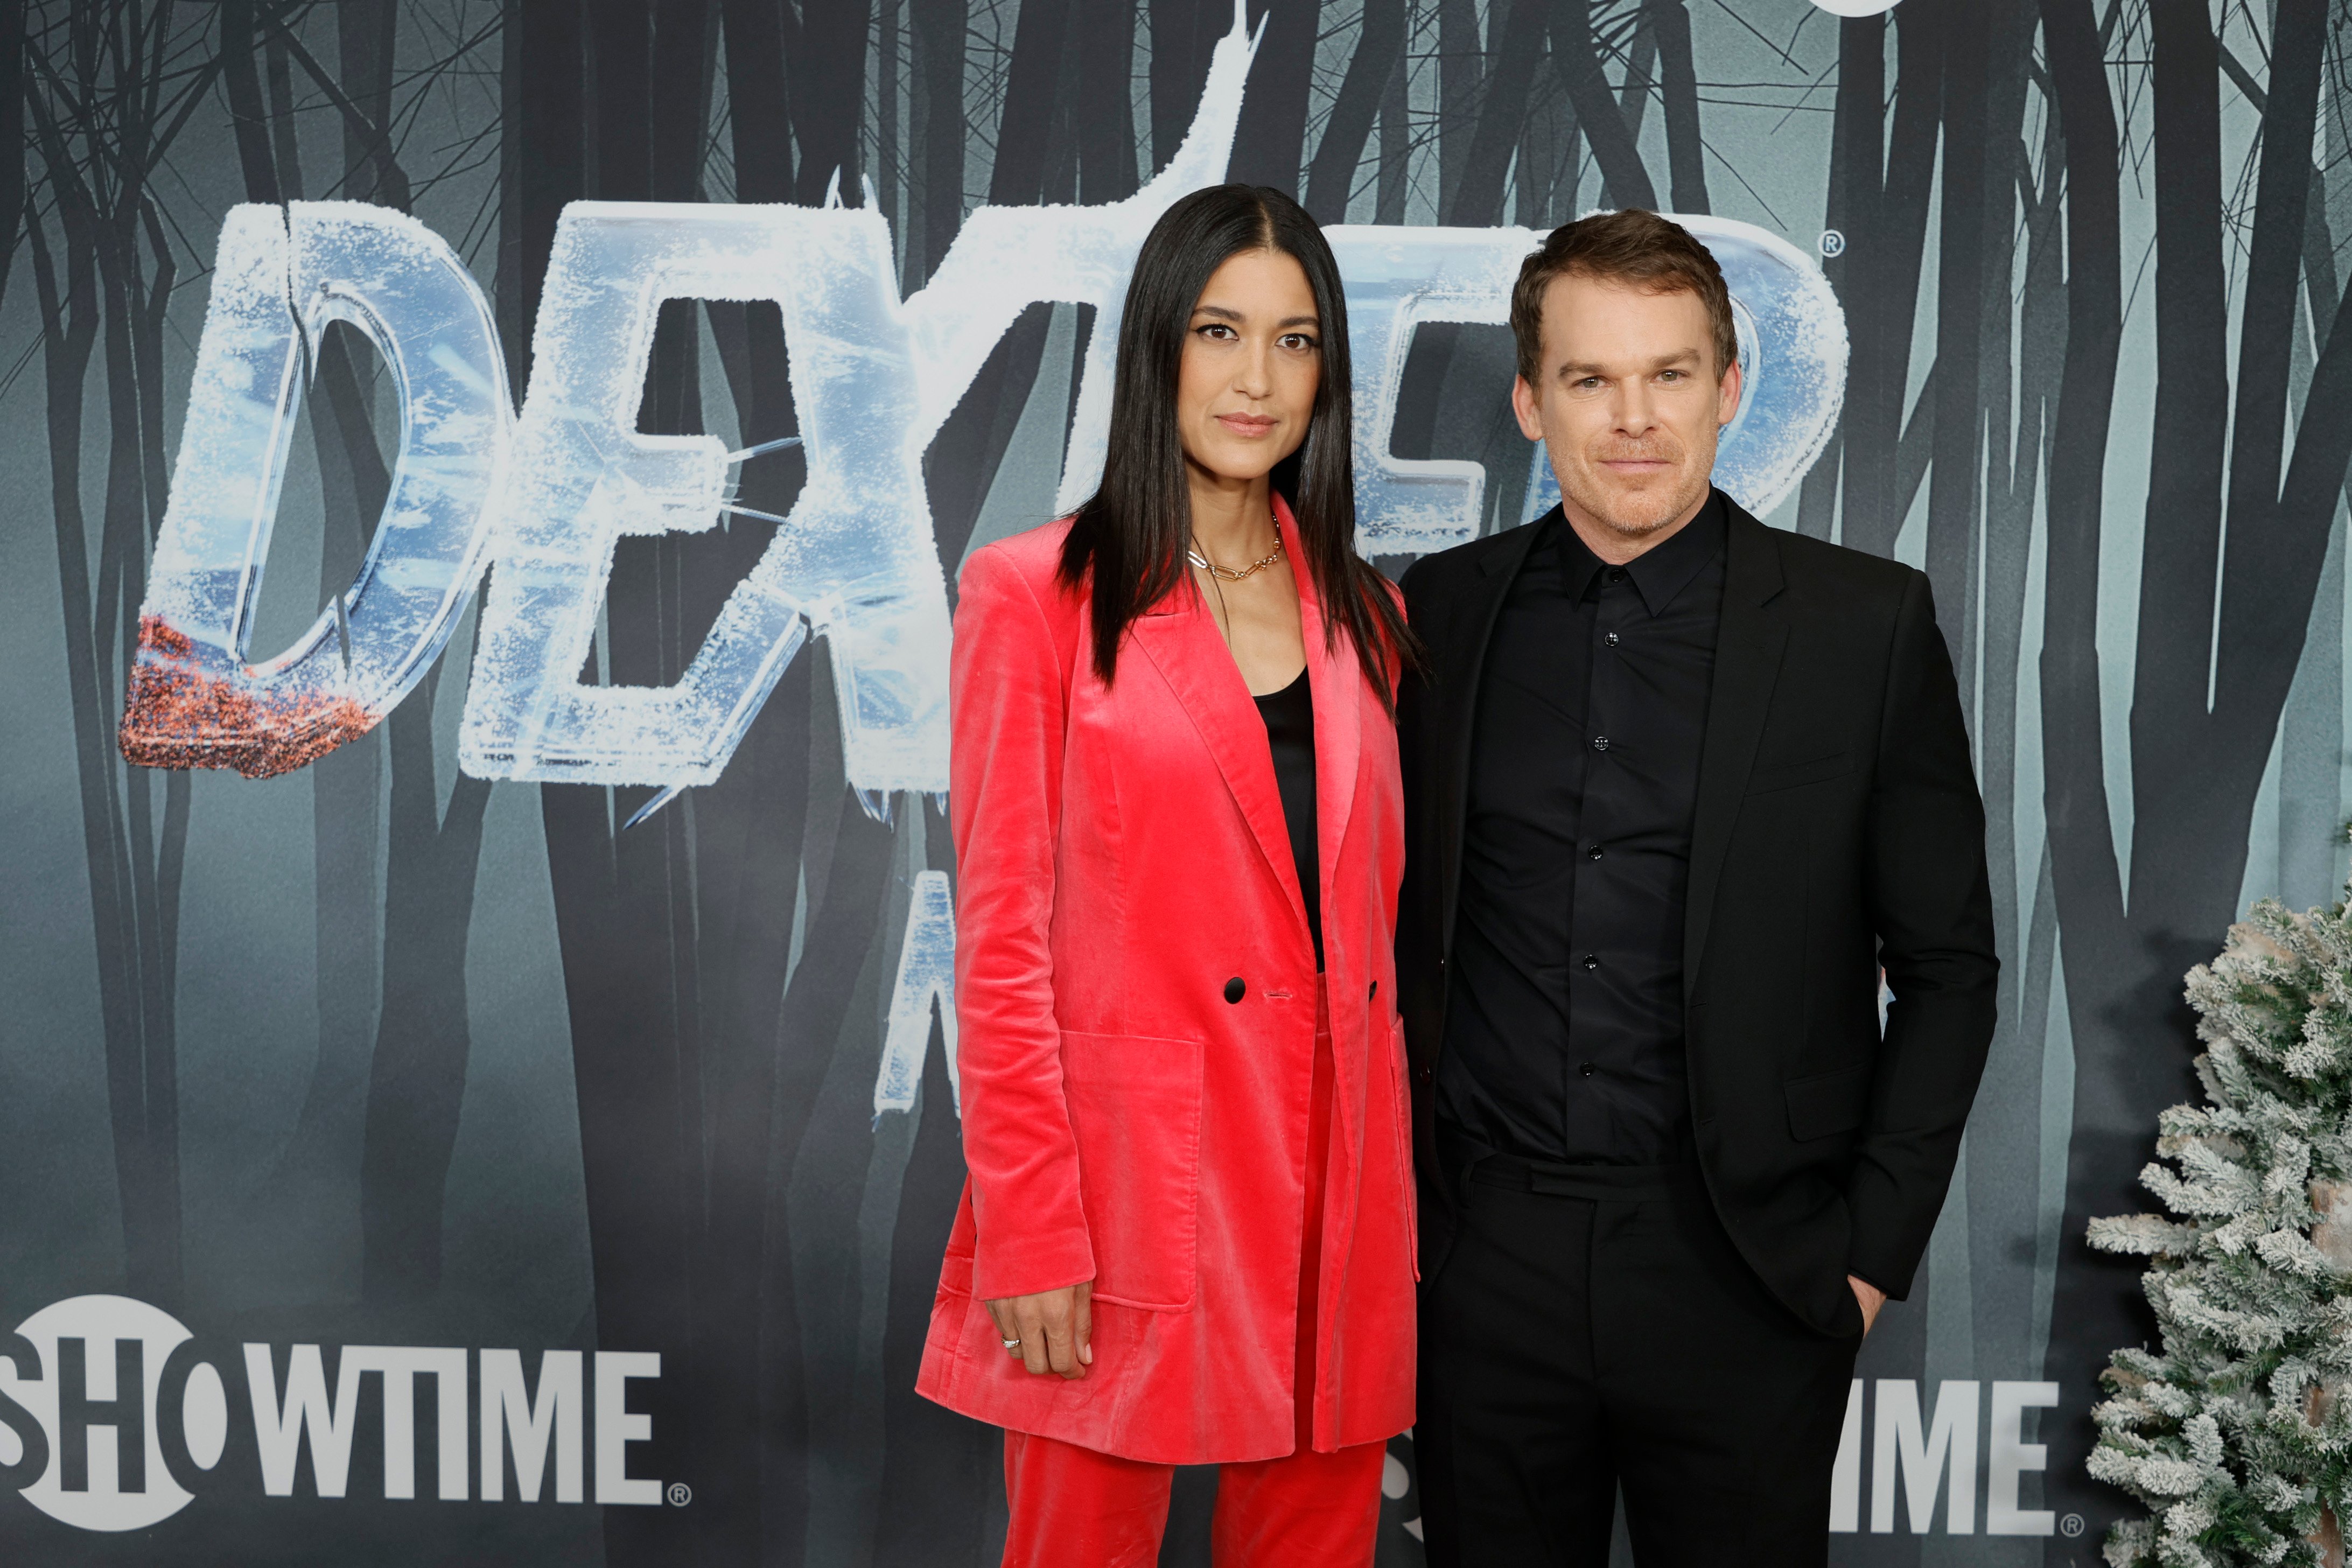 Julia Jones and Michael C. Hall attend the world premiere of Dexter: New Blood Series at Alice Tully Hall. Hall is wearing all black and Jones is wearing a salmon-colored outfit.